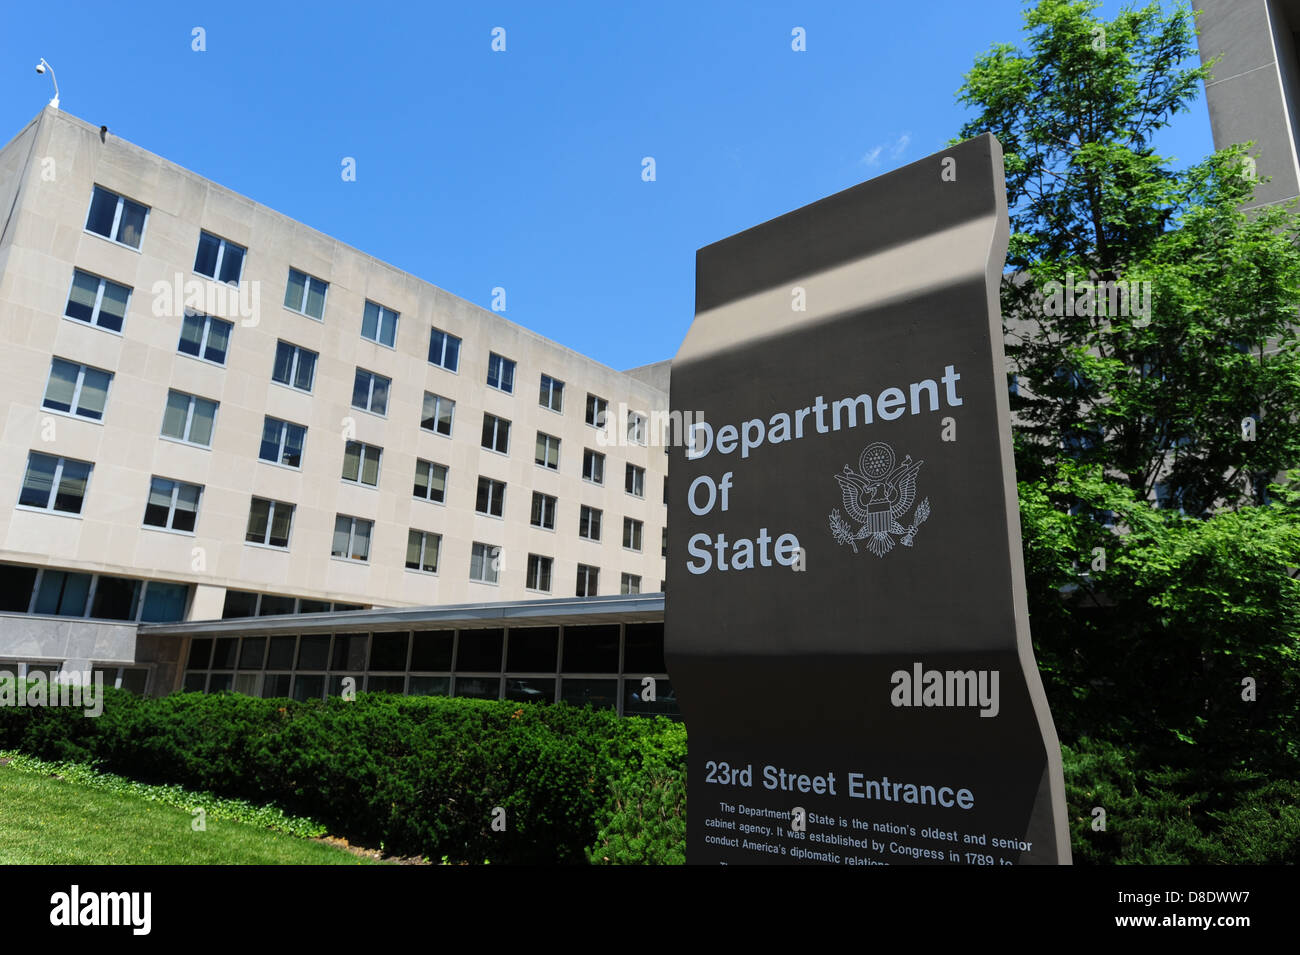 USA Washington DC District of Columbia Federal Government The Department of State foreign service diplomacy diplomats Stock Photo